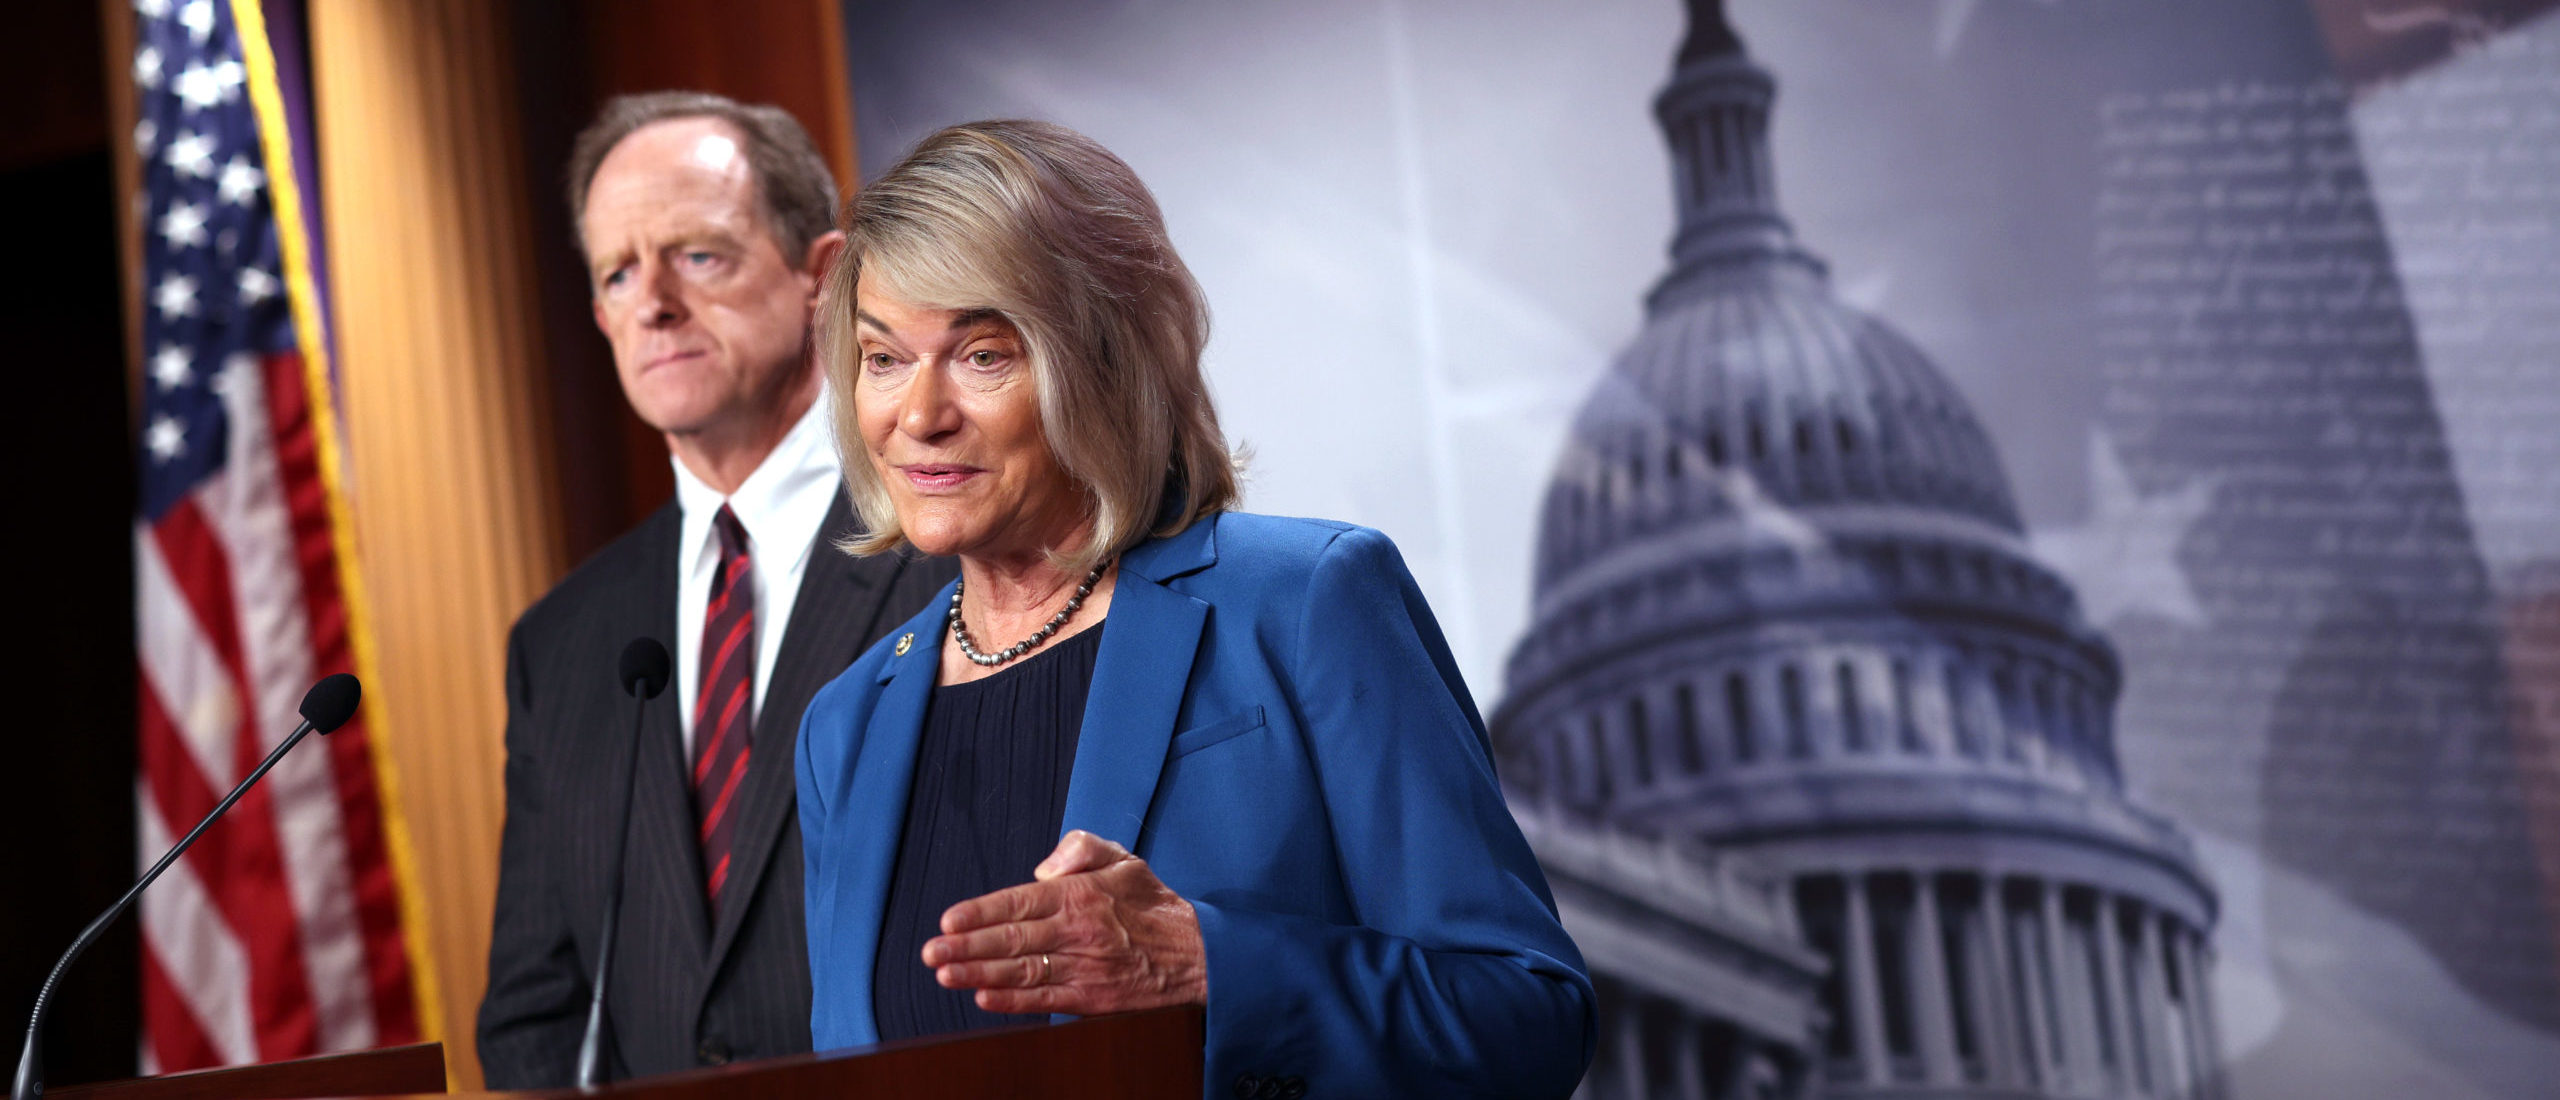 Sen. Cynthia Lummis (R-WY), joined by Sen. Pat Toomey (R-PA), speaks on a cryptocurrency amendment to the bipartisan infrastructure bill, at the U.S. Capitol on August 09, 2021 in Washington, DC. The amendment would aim to narrow the digital asset reporting requirement to brokers of cryptocurrency in the infrastructure bill. (Photo by Kevin Dietsch/Getty Images)